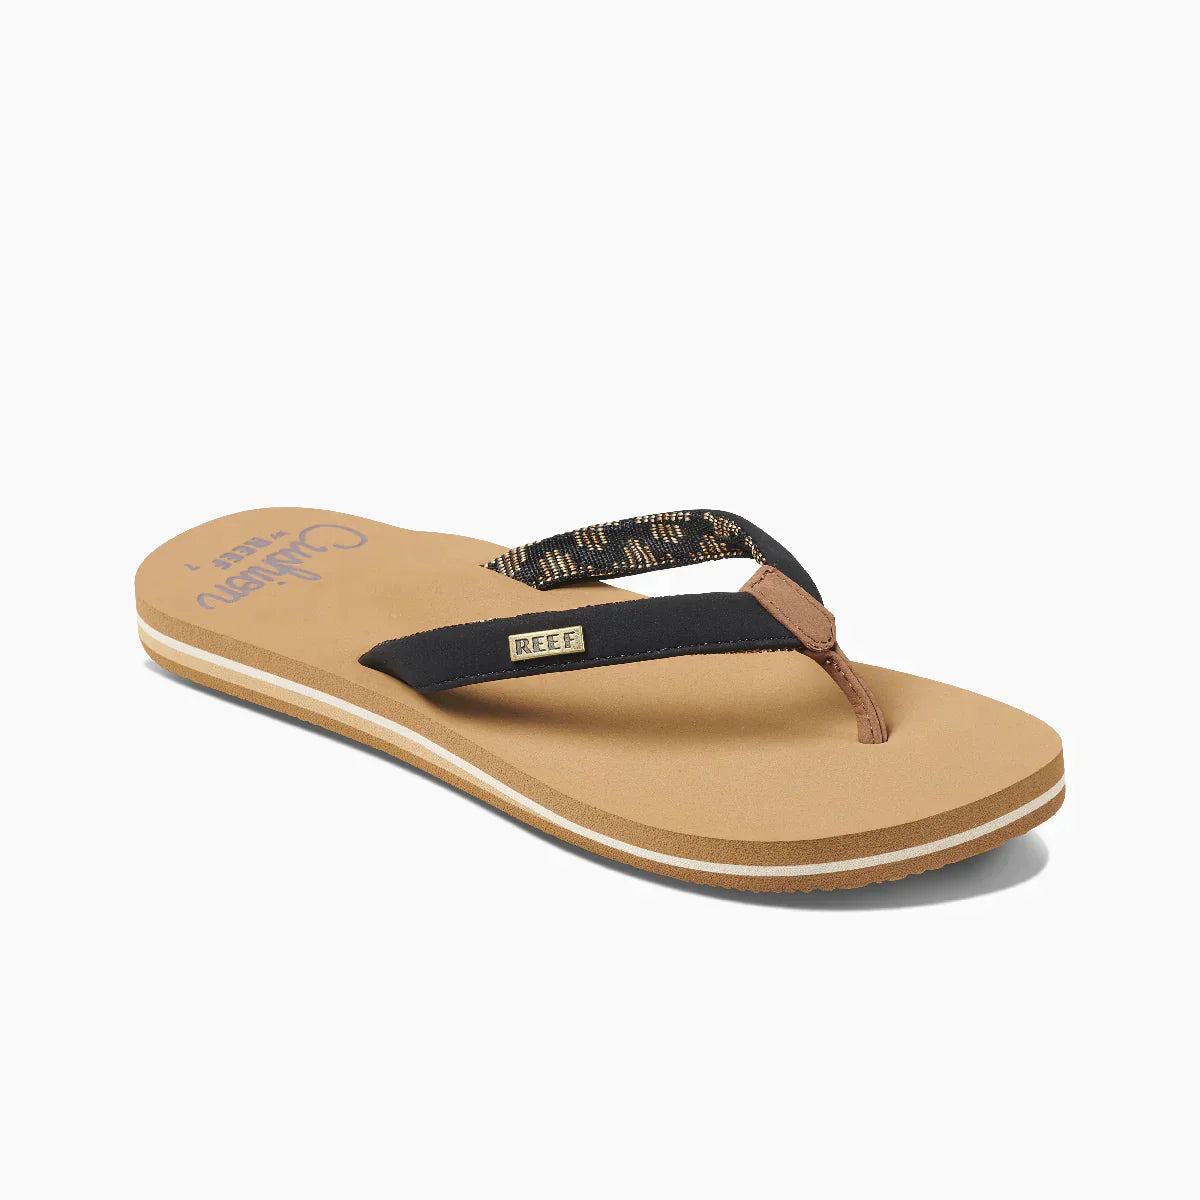 Sandals – Tagged Women's